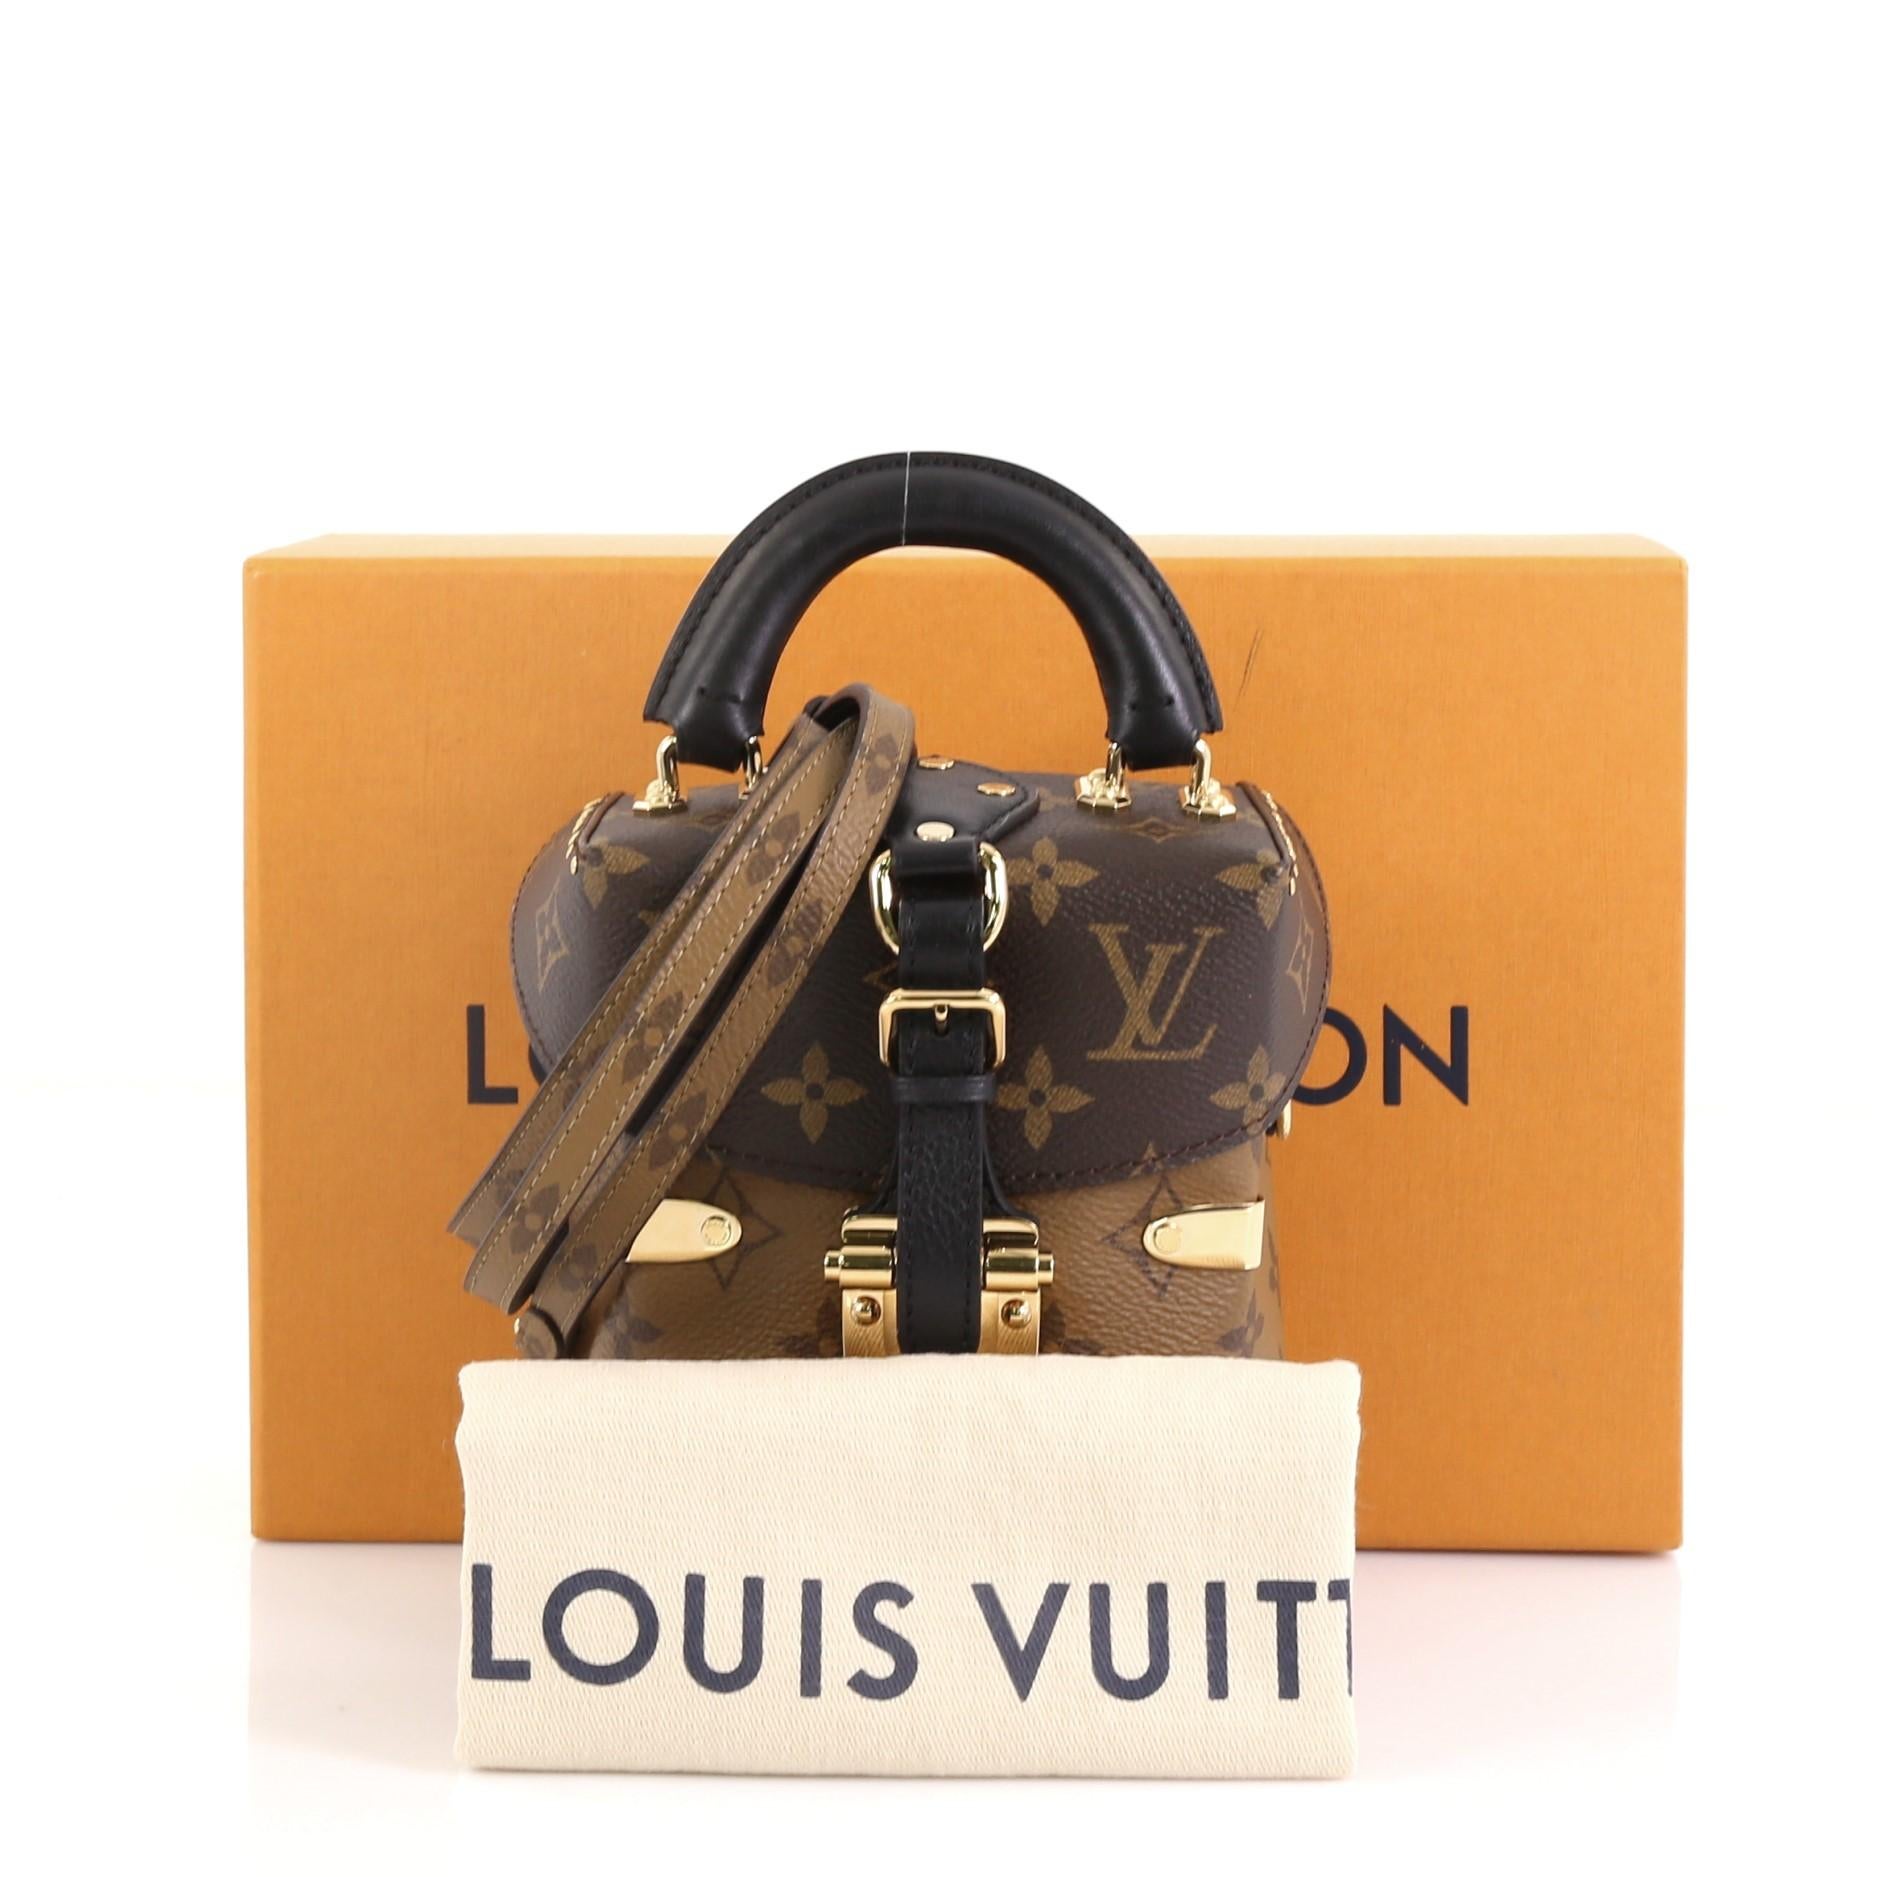 This Louis Vuitton Camera Box Handbag Studded Reverse Monogram Canvas, crafted from brown monogram coated canvas, features leather top handle, stud embellishment, and gold-tone hardware. Its press lock closure opens to a black microfiber interior